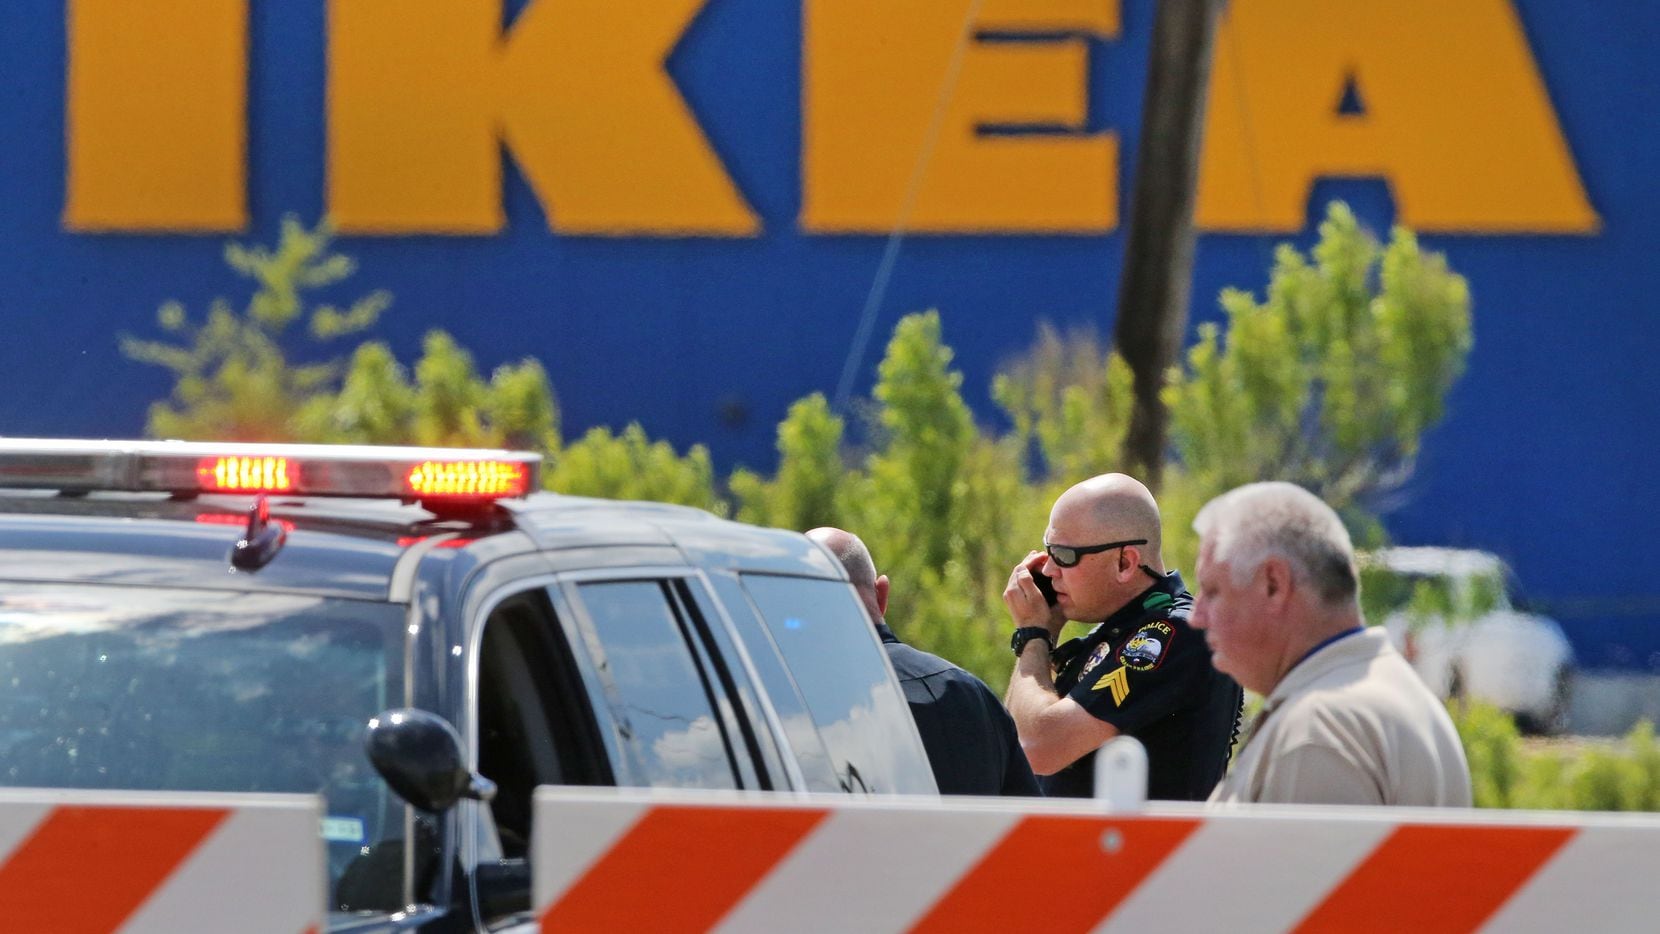 Grand Prairie police officers at the scene of a confrontation with an armed man outside the...